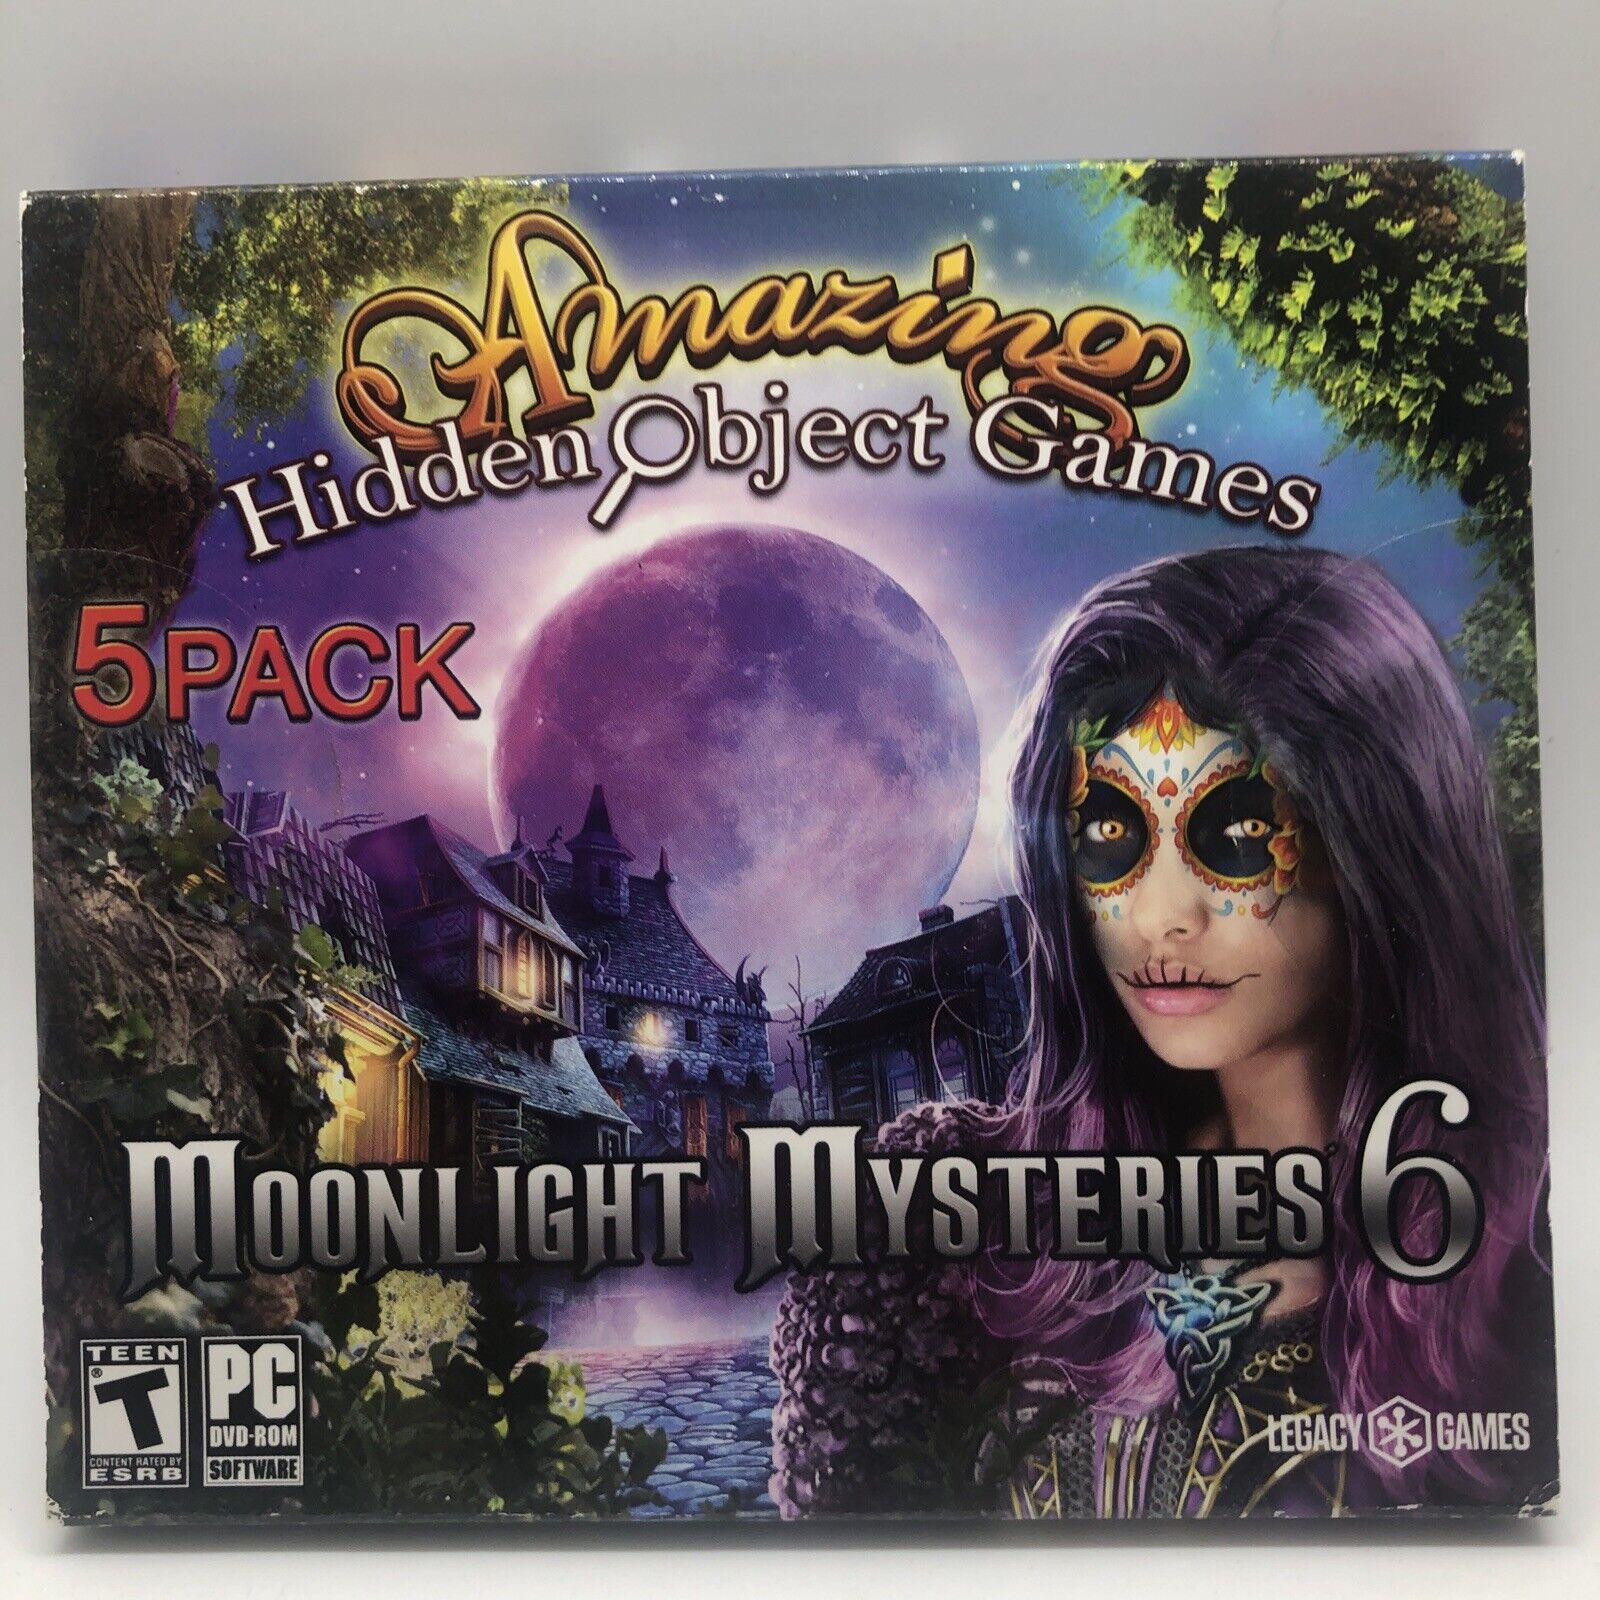 Amazing Hidden Objects Games Moonlight Mysteries 6 (PC), 5 Pack New